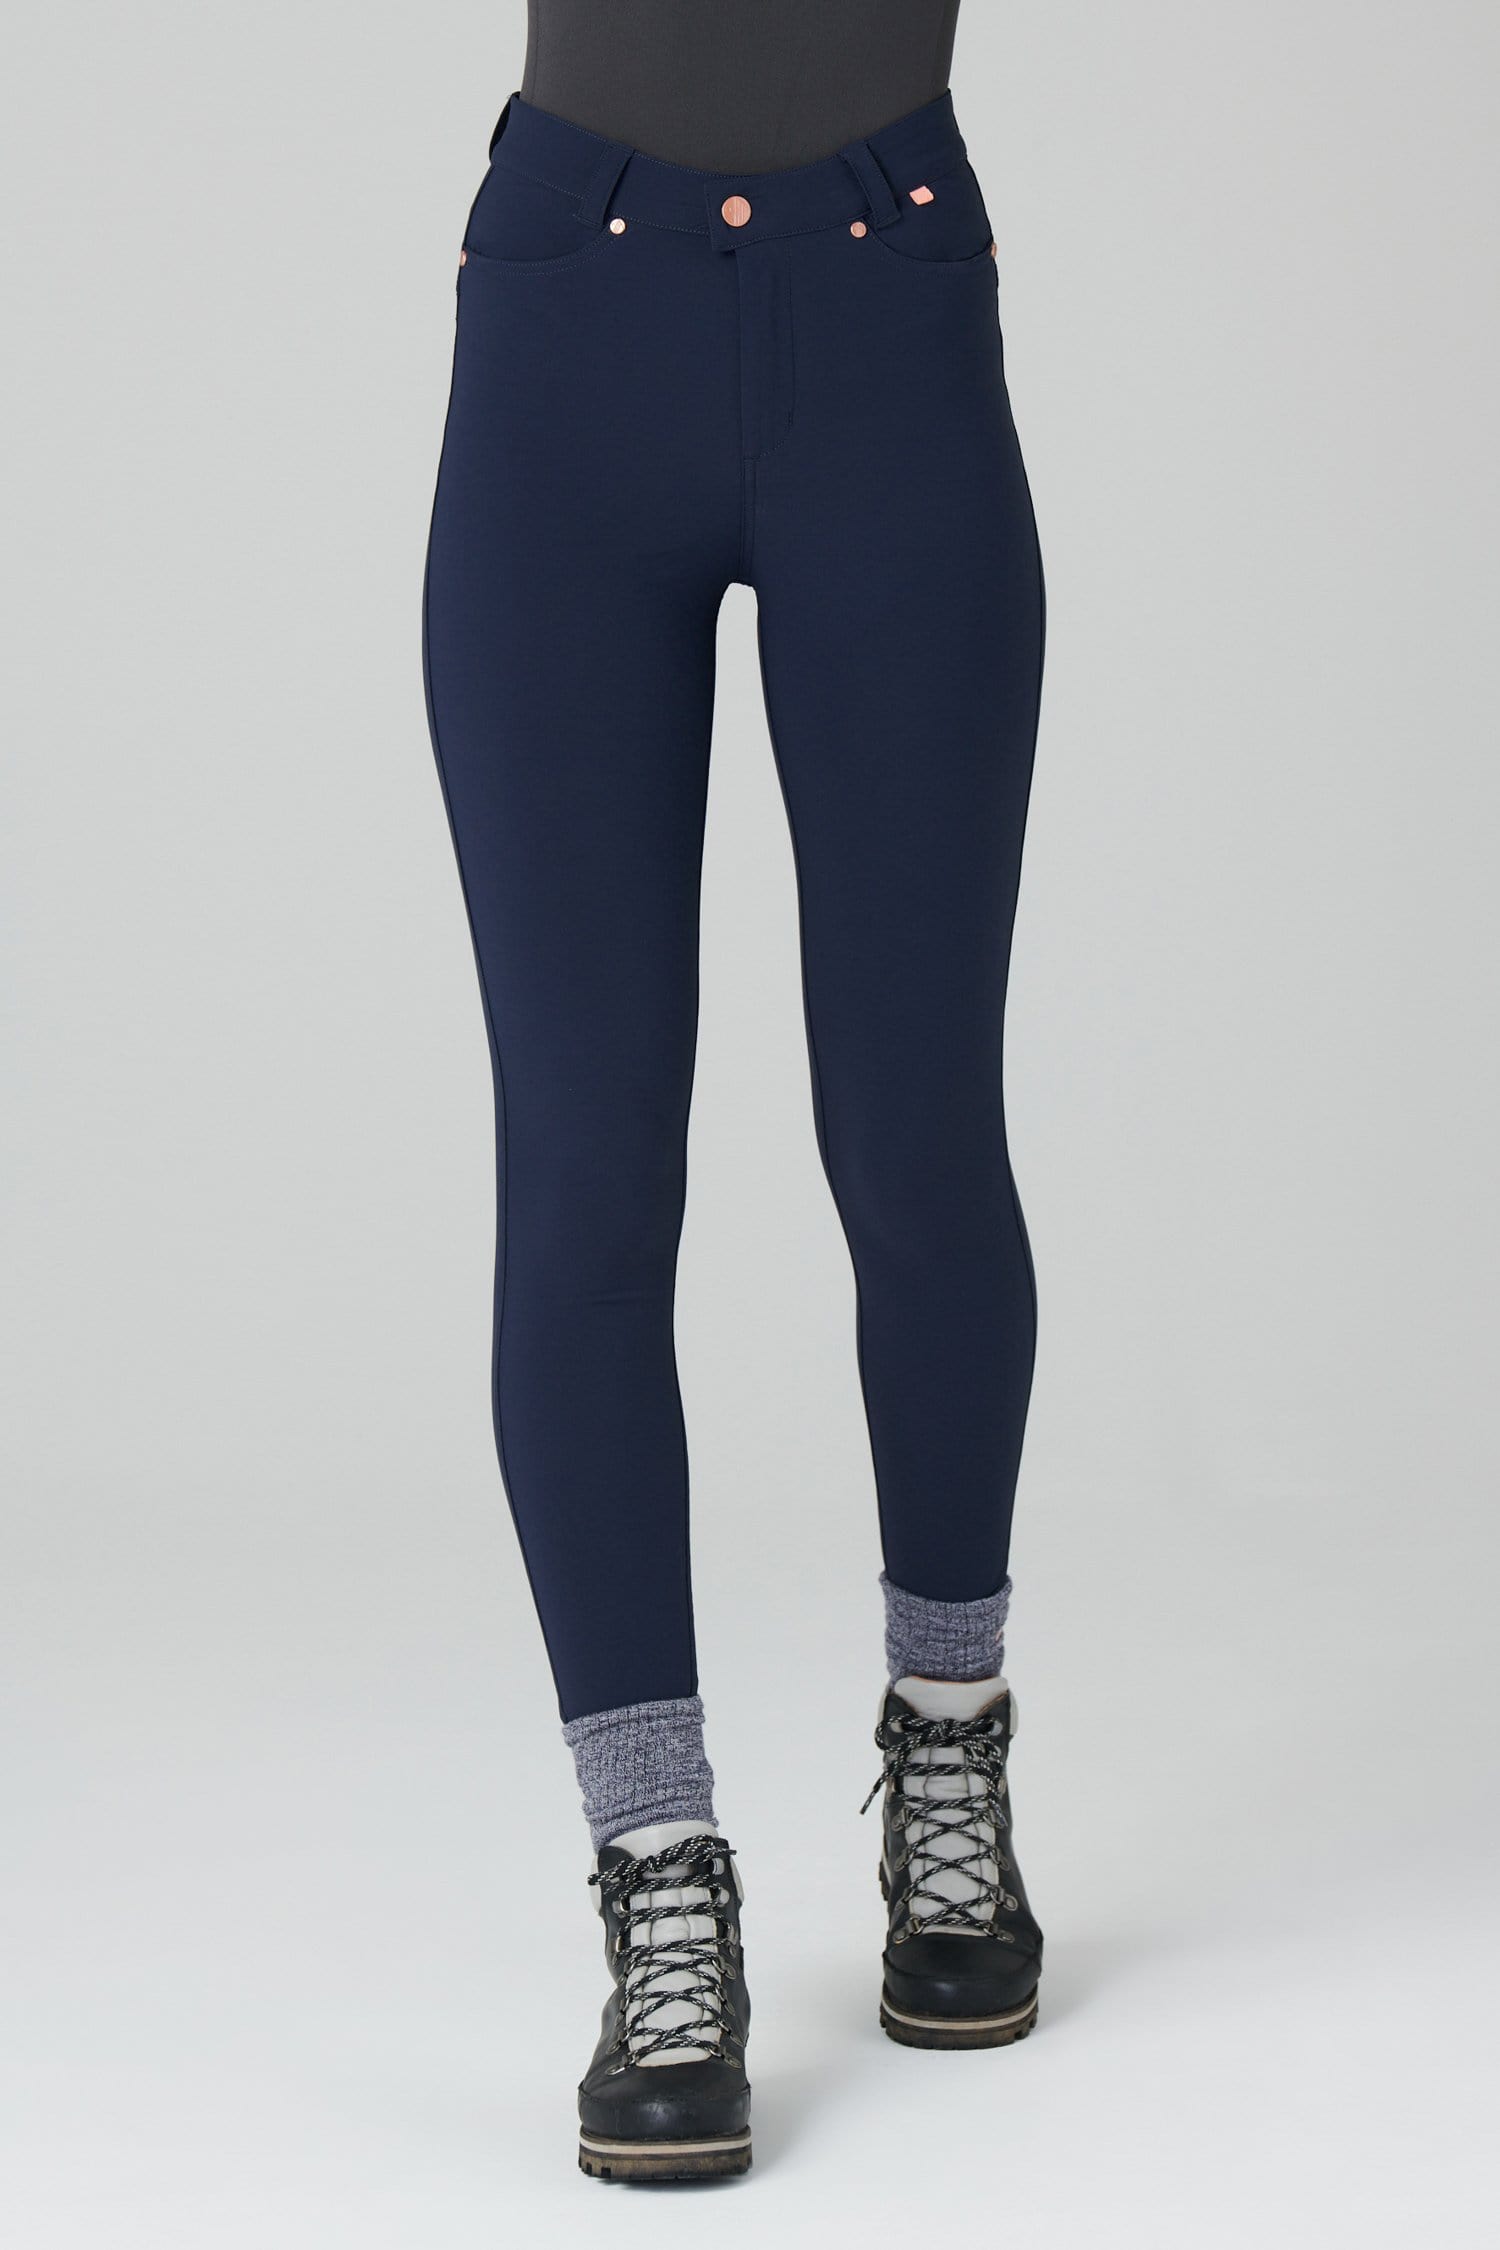 Max Stretch Skinny Outdoor Trousers - Deep Navy - 32r / Uk14 - Womens - Acai Outdoorwear